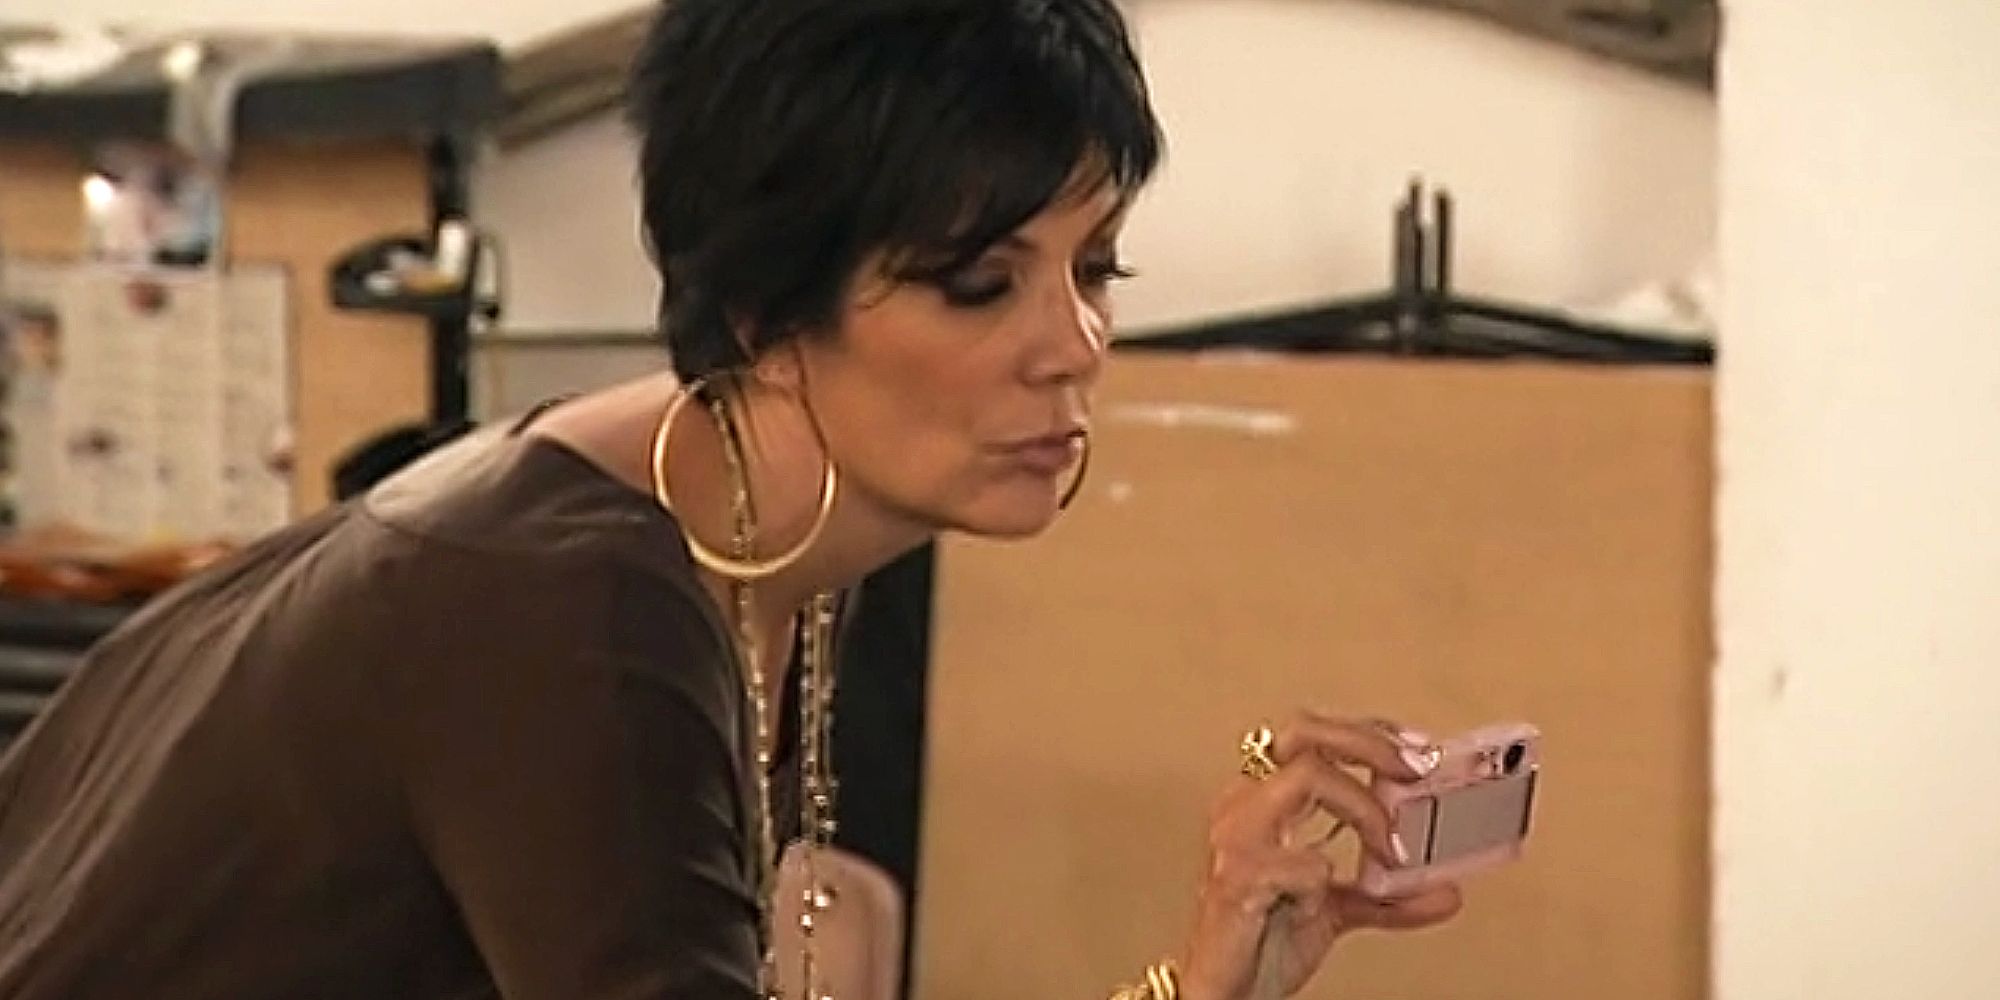 Kris Jenner holding a digital camera, sweetie, on Keeping Up With The Kardashians